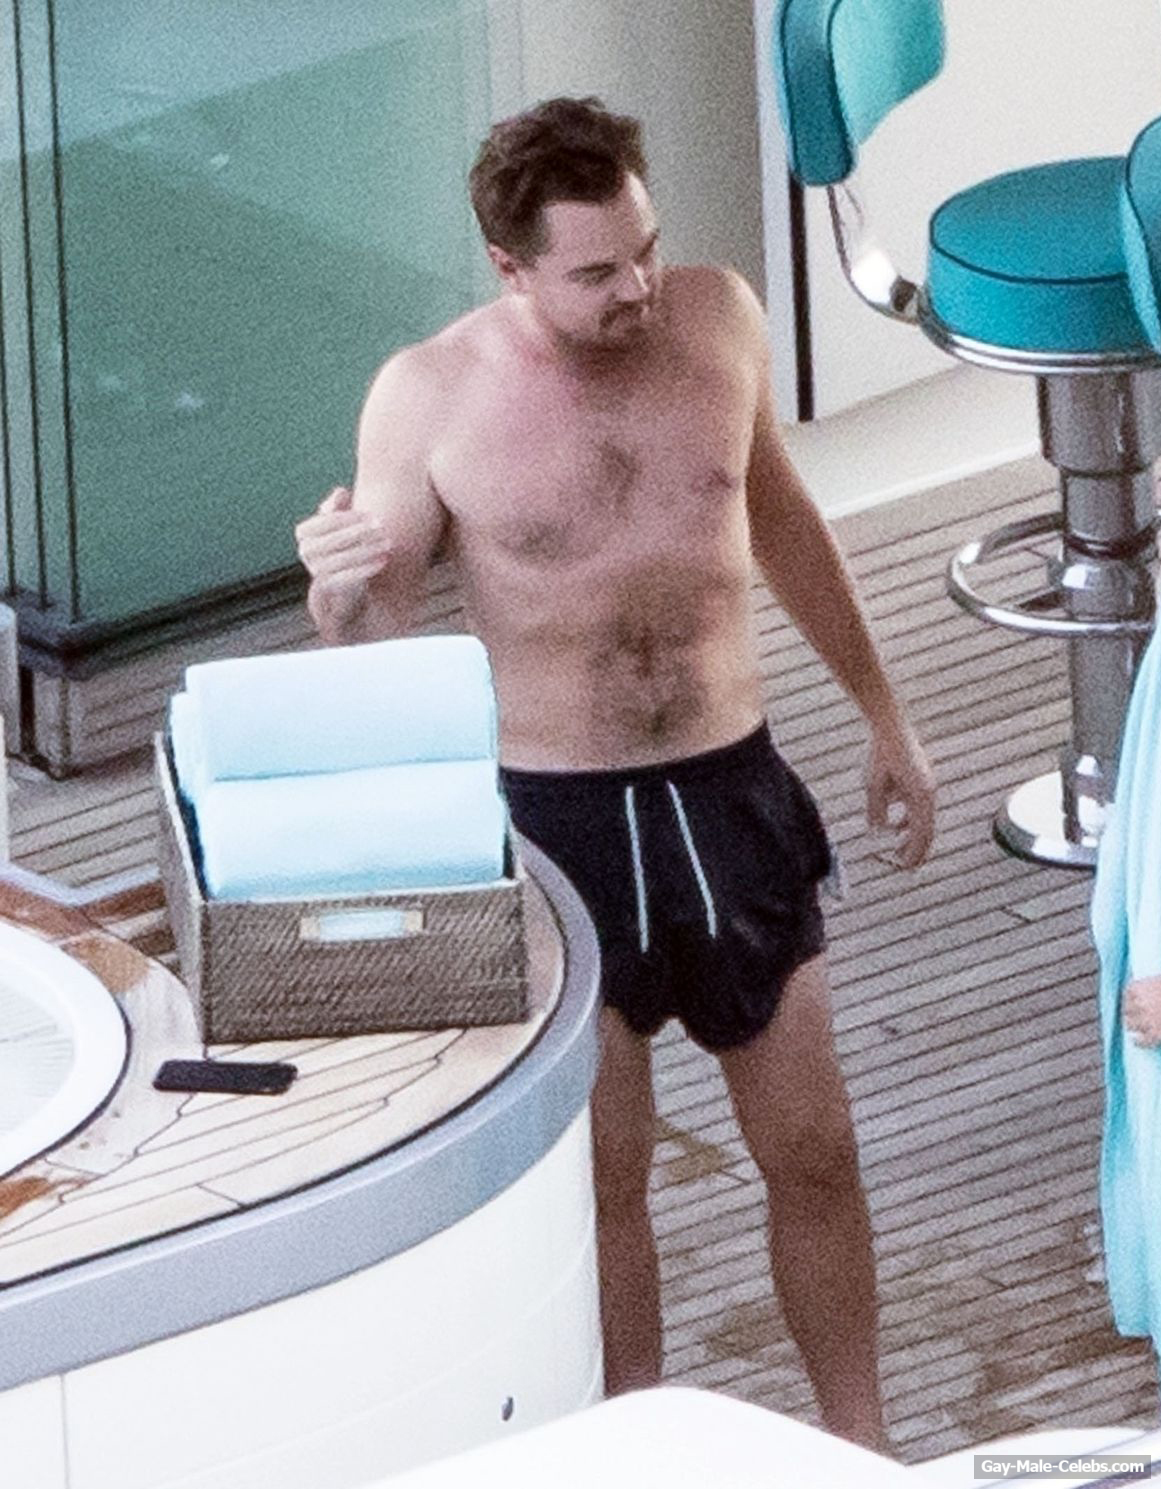 Leonardo DiCaprio Caught Relaxing Shirtless On A Yacht